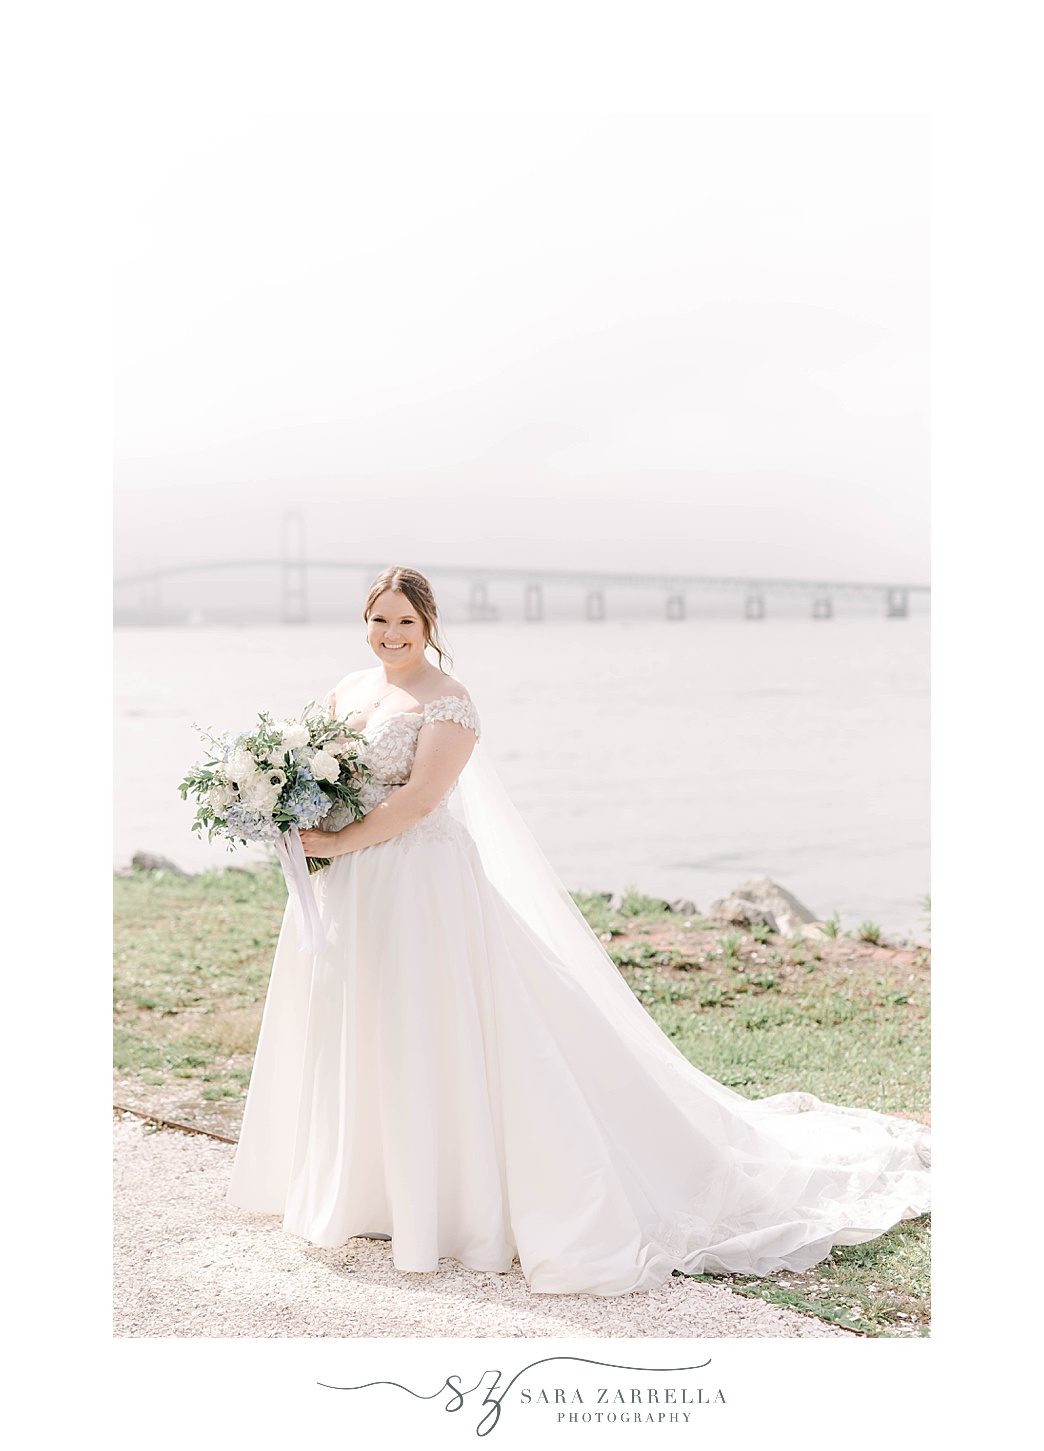 bride poses holding bouquet of white and blue flowers 